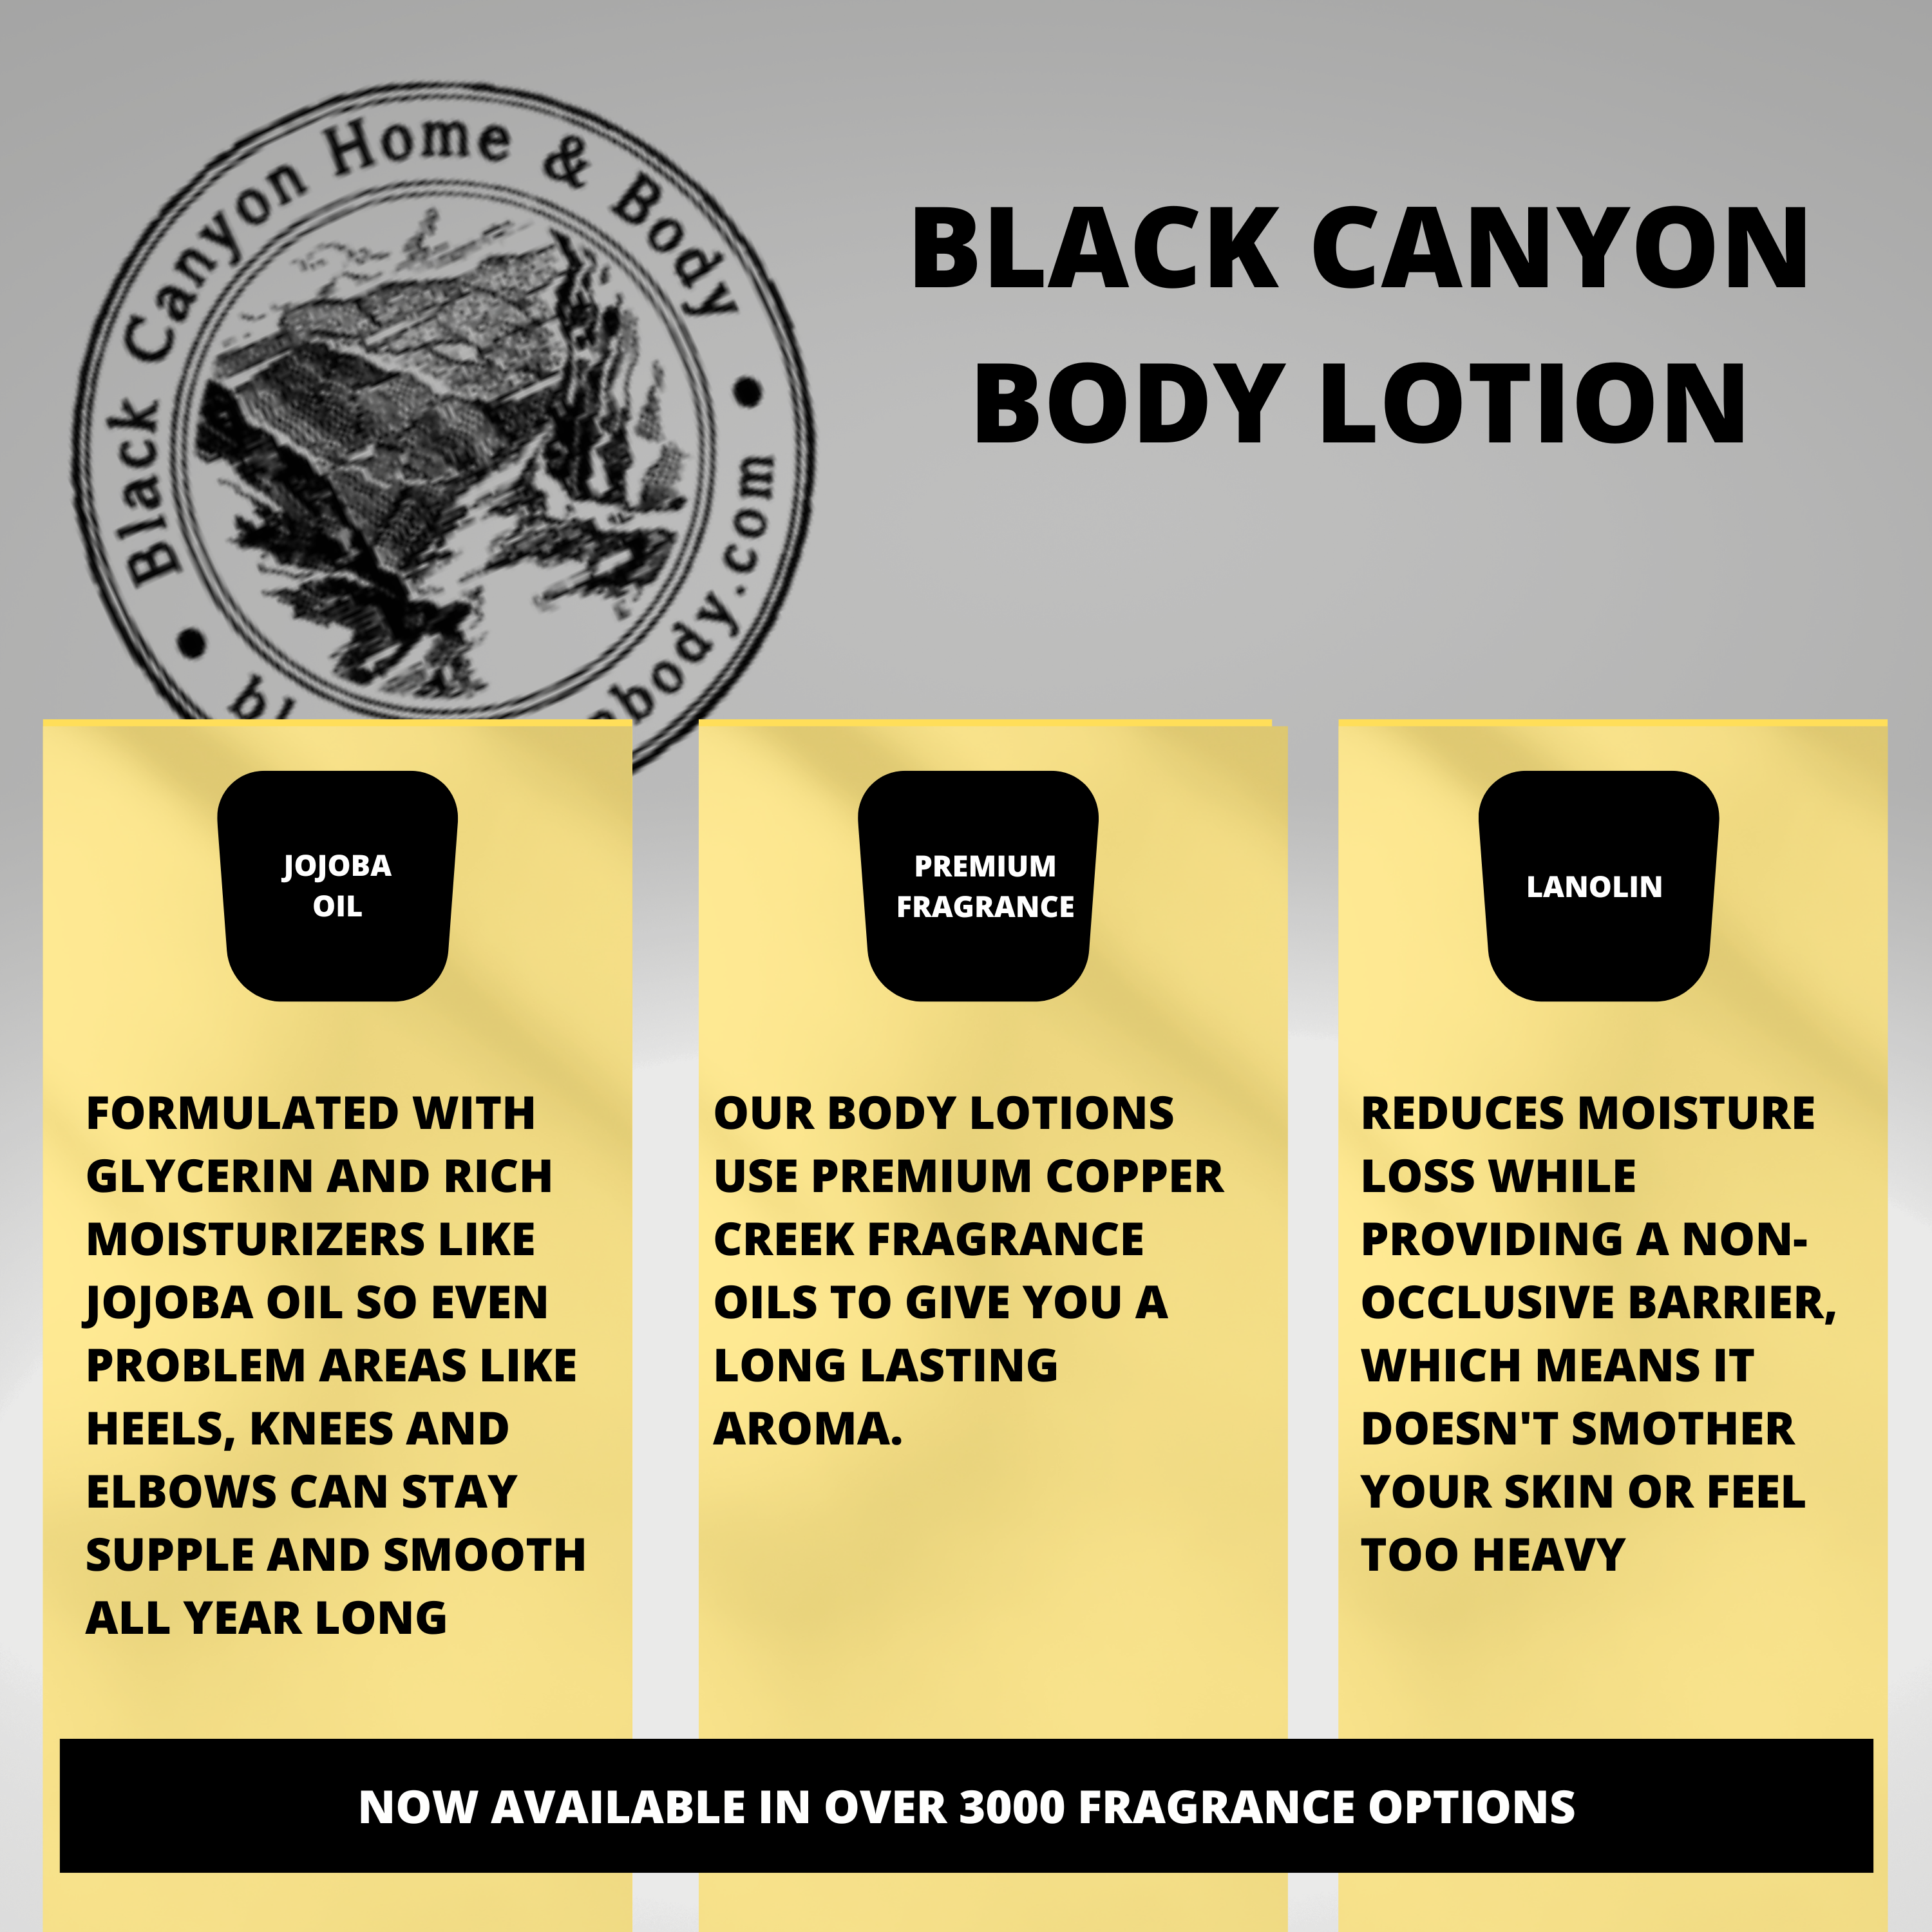 Black Canyon Heavenly Cranberry Scented Luxury Body Lotion with Lanolin and Jojoba Oil